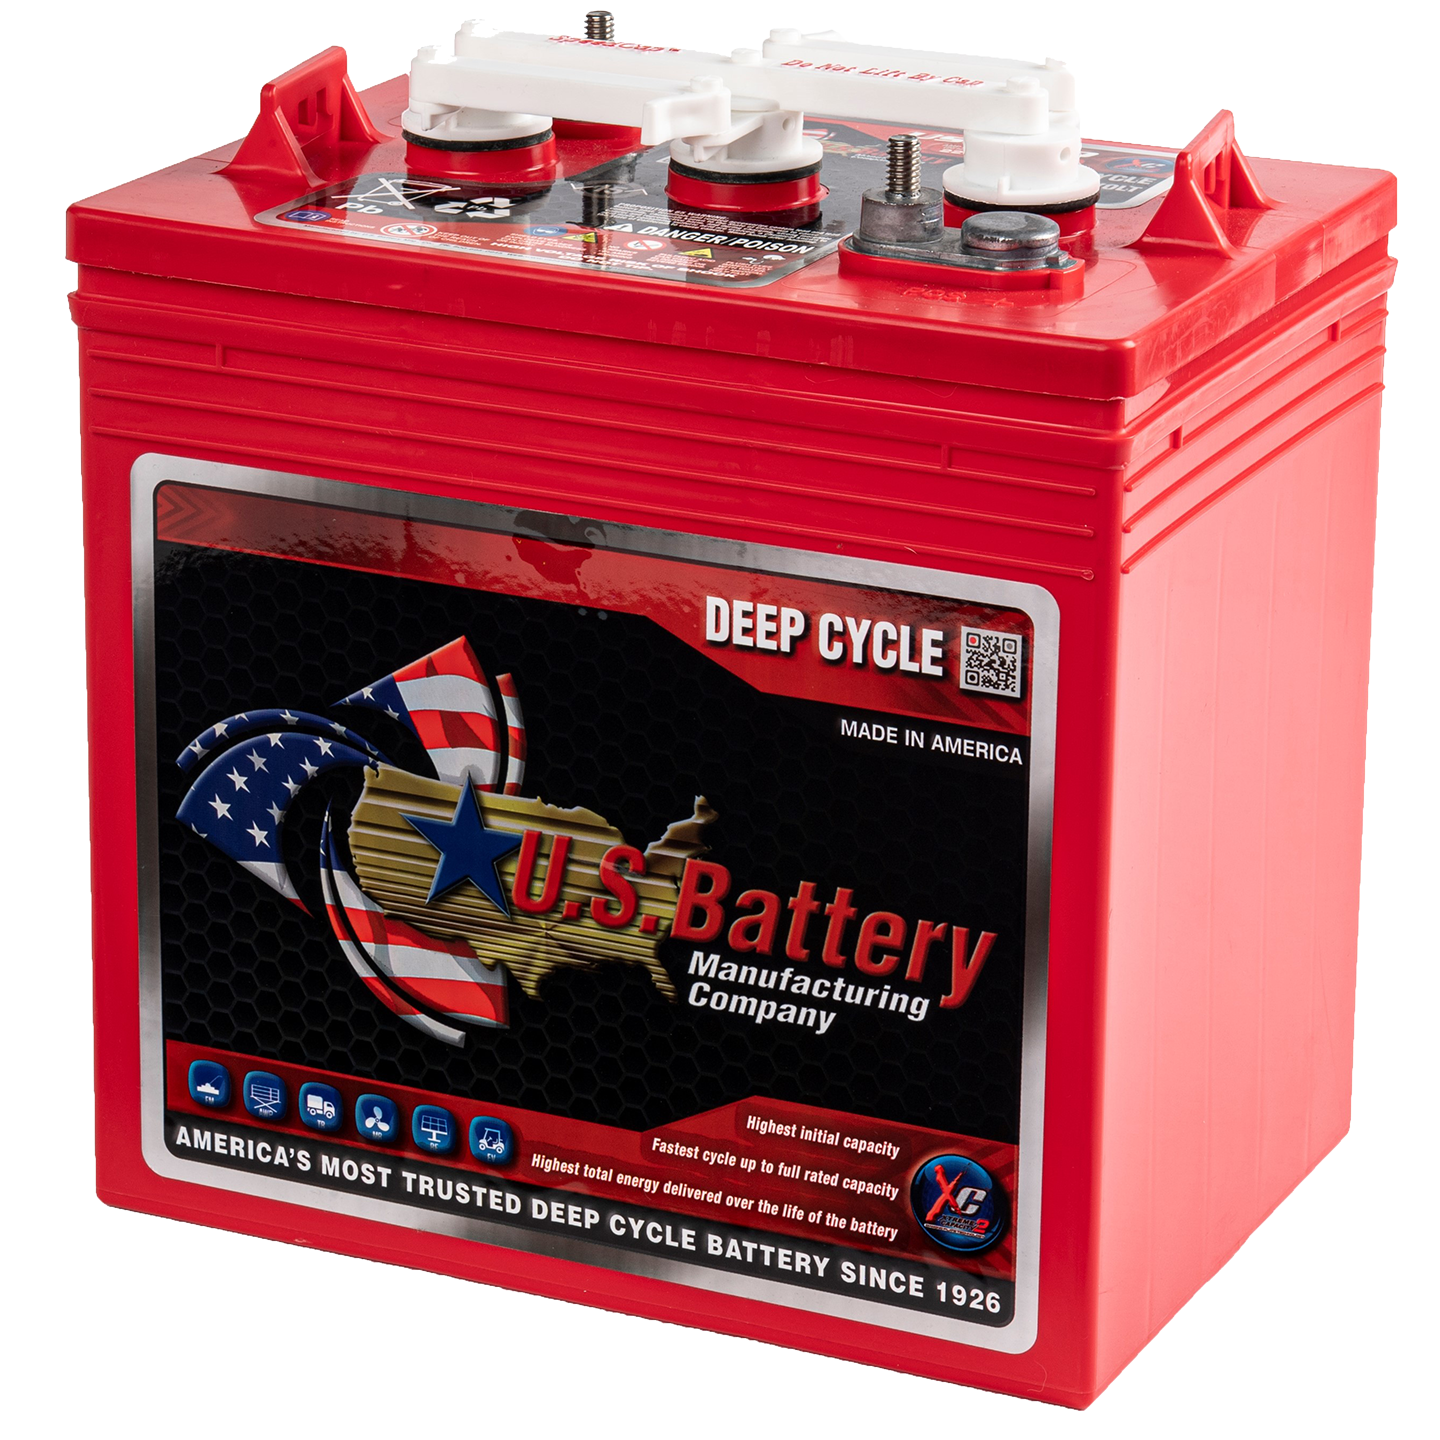 Deep cycle battery banks consist of one or more batteries, and are measured...